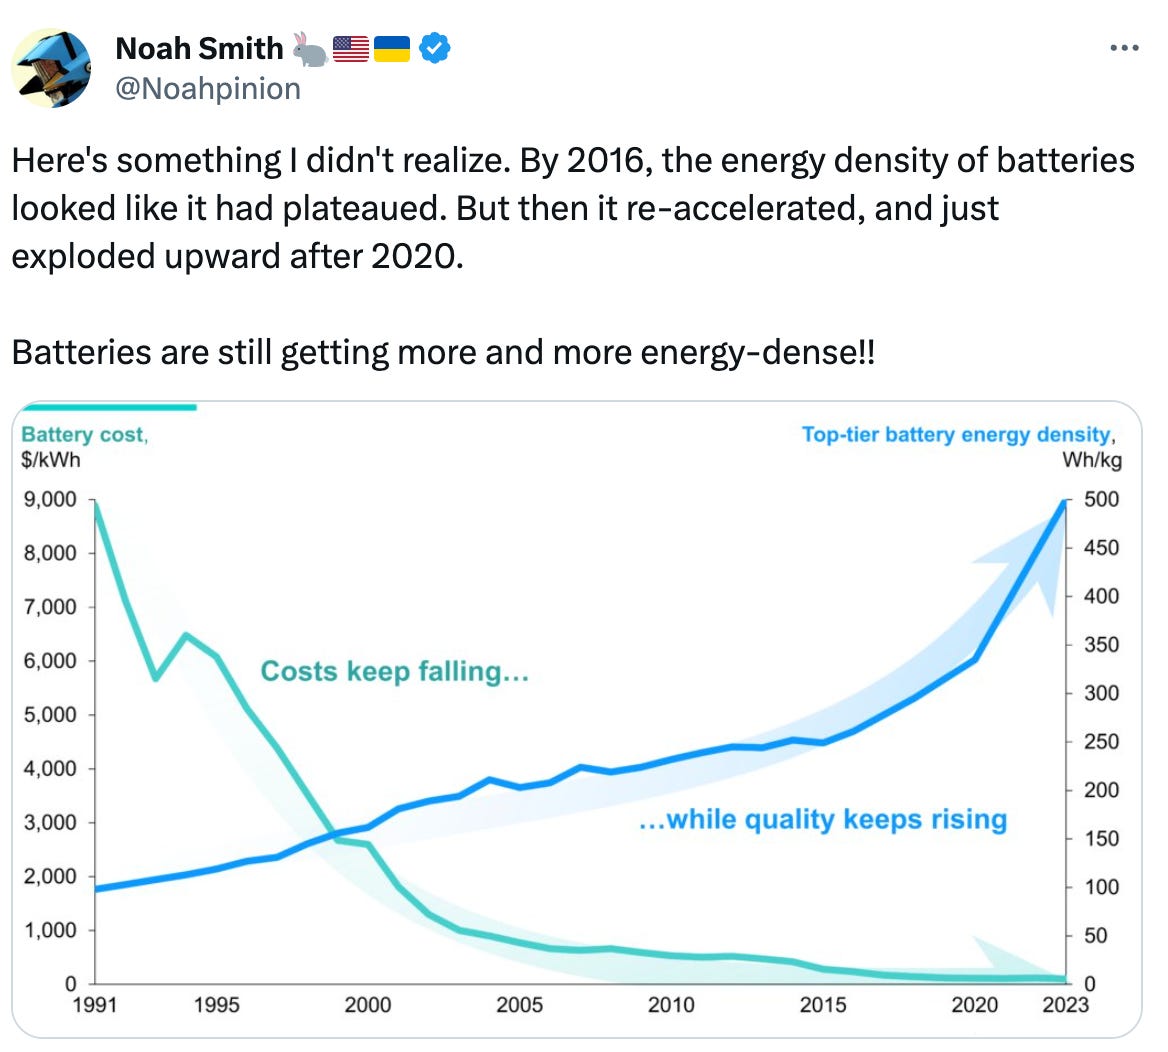  See new posts Conversation Noah Smith 🐇🇺🇸🇺🇦 @Noahpinion Here's something I didn't realize. By 2016, the energy density of batteries looked like it had plateaued. But then it re-accelerated, and just exploded upward after 2020.   Batteries are still getting more and more energy-dense!!